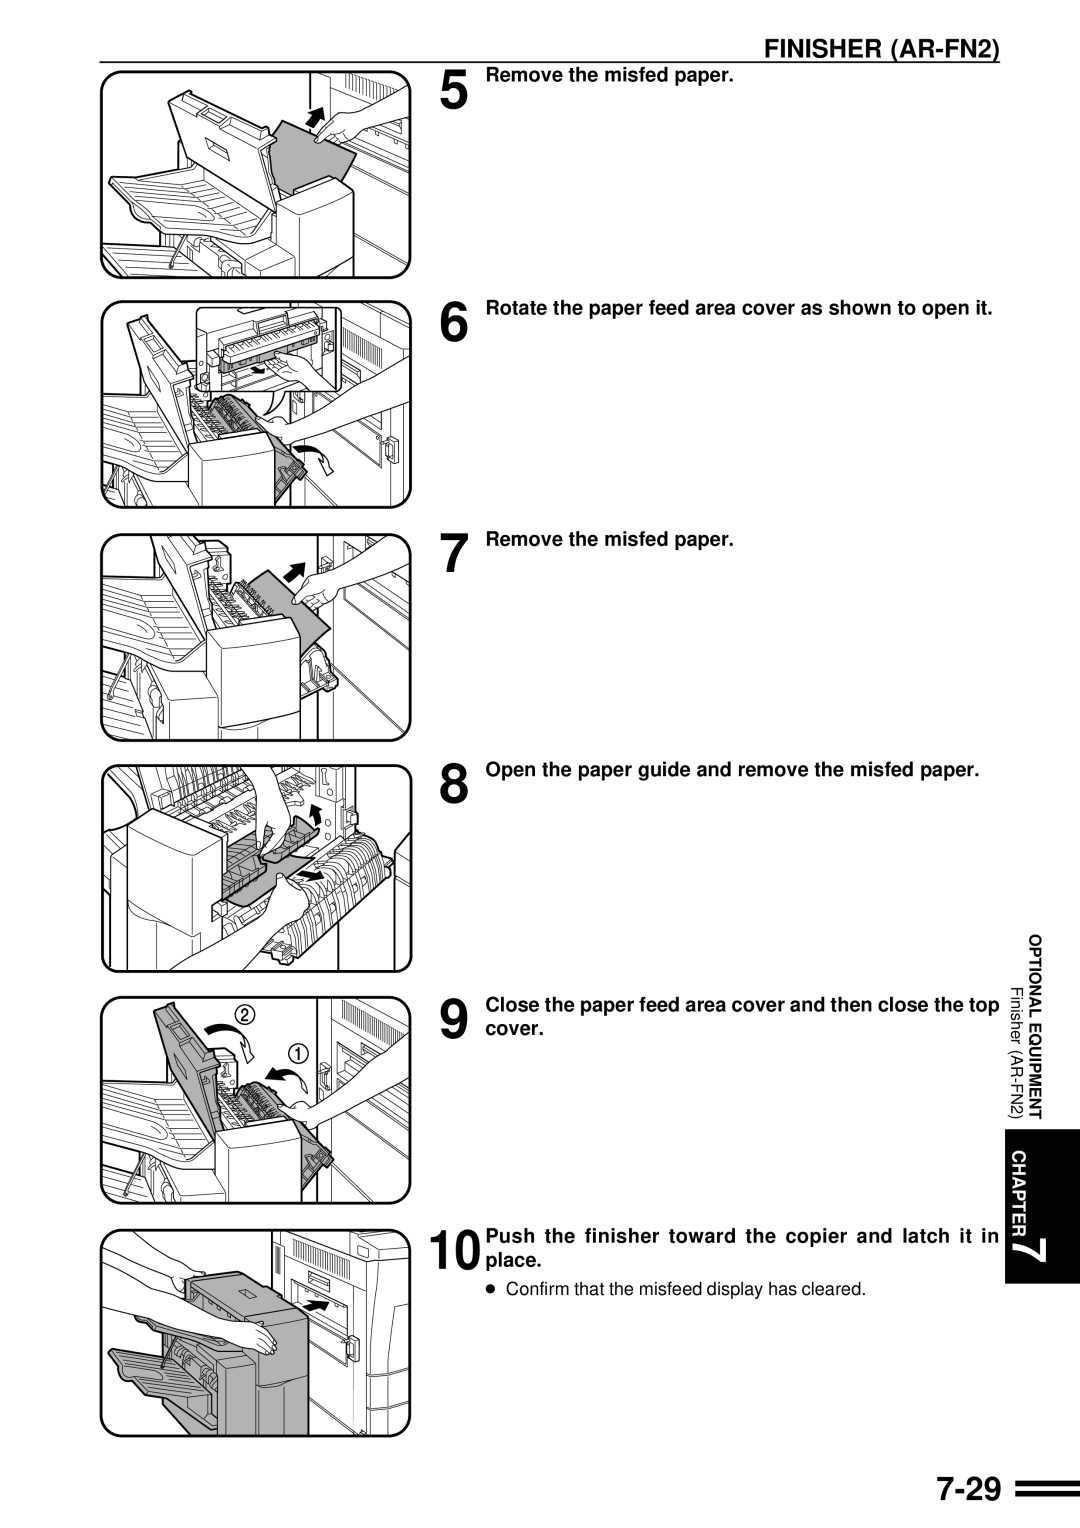 Sharp AR-287 manual 7-29, Remove the misfed paper, Rotate the paper feed area cover as shown to open it, Optional Equipment 